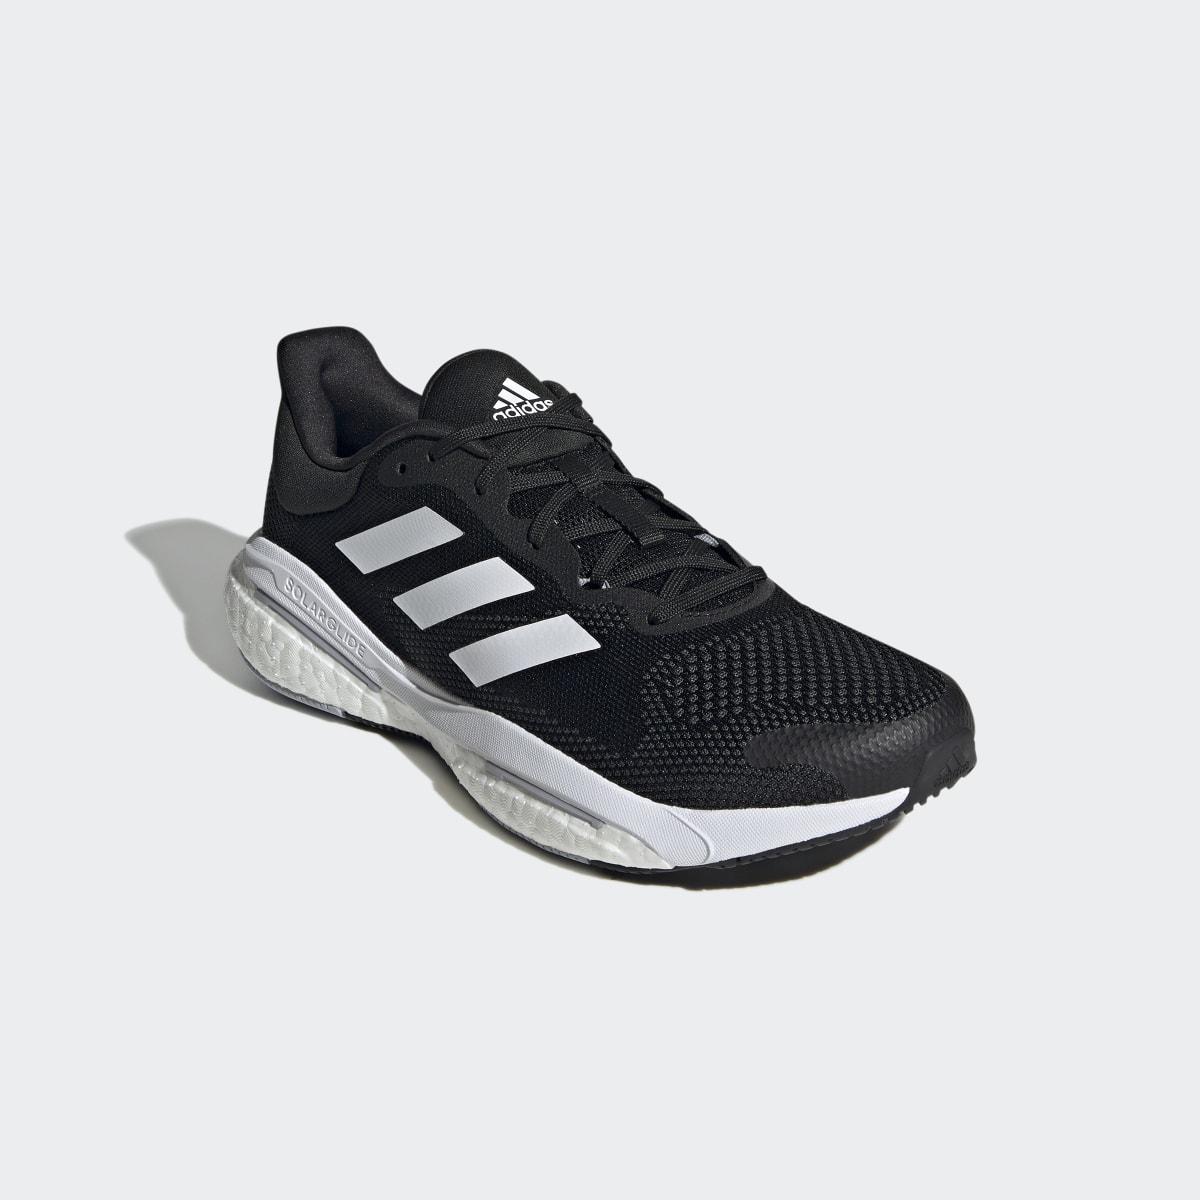 Adidas Solarglide 5 Shoes. 5